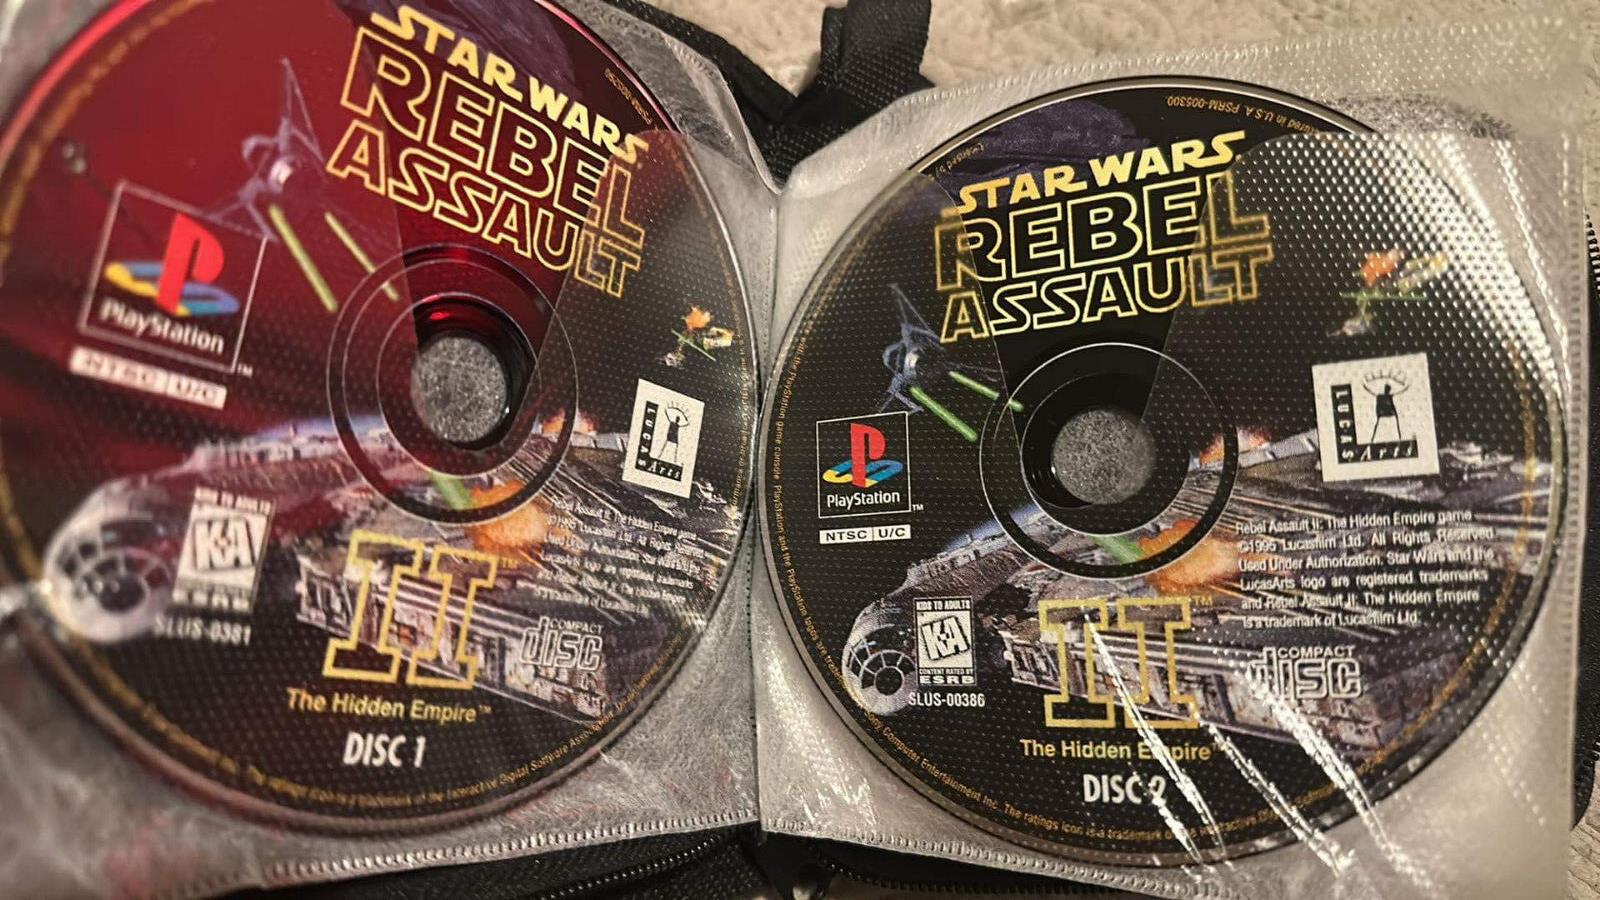 Star Wars Rebel Assault II PS1 Sony PlayStation DISCS ONLY (Disc 1 & 2 )